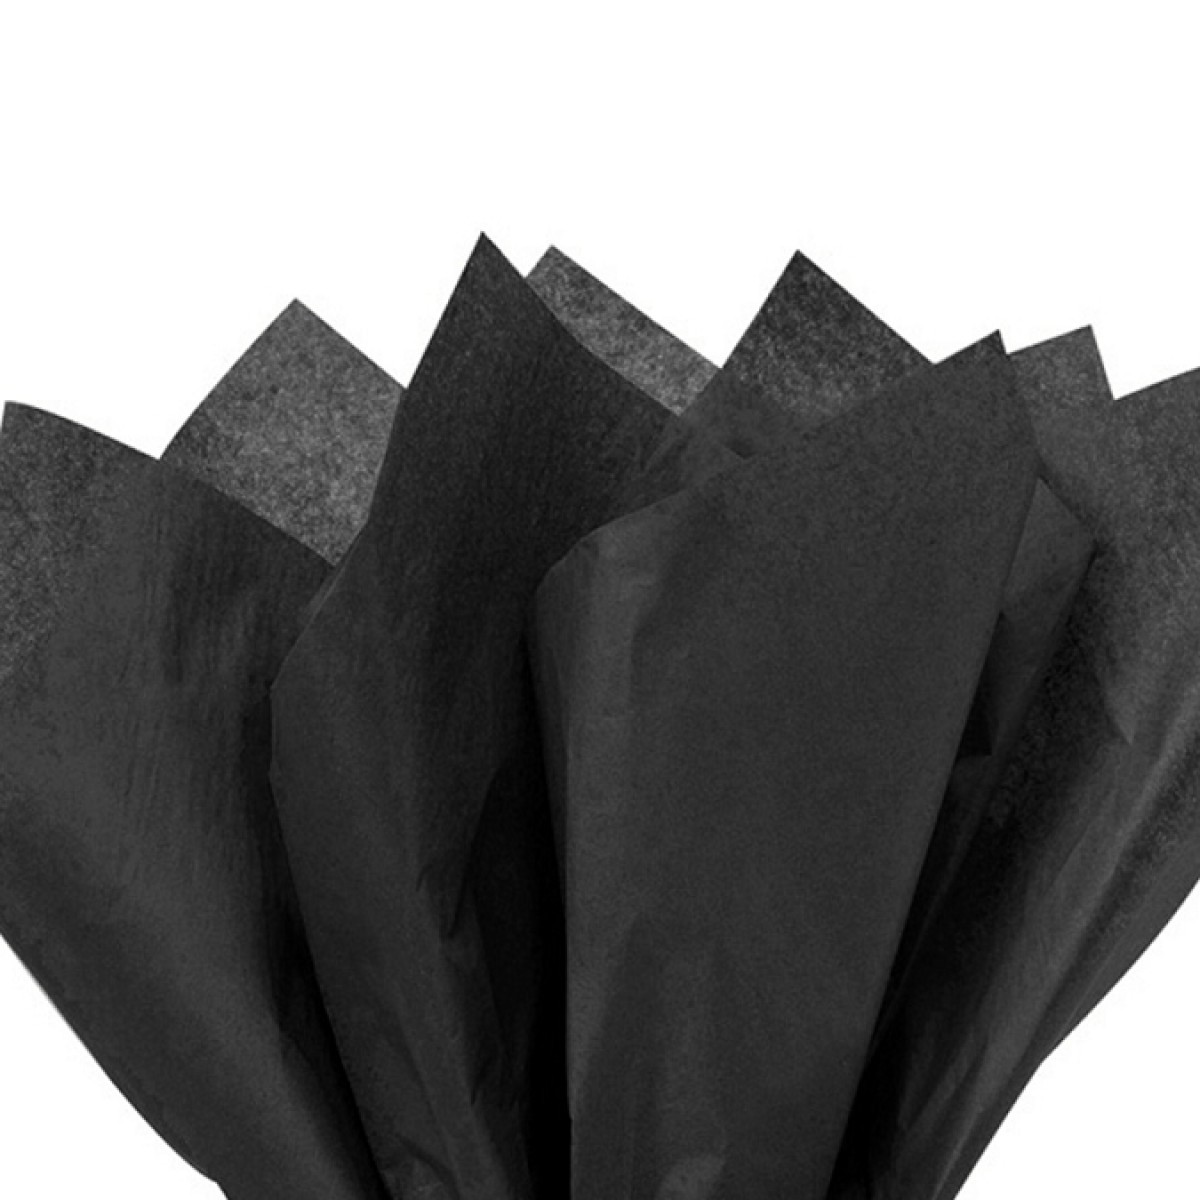 Oasis Floral Products Tissue Paper Non Woven Fabric for Gift Flowers Making  and Bouquet Wrapping 24x28 Inch (Black Color, 100 Sheets)